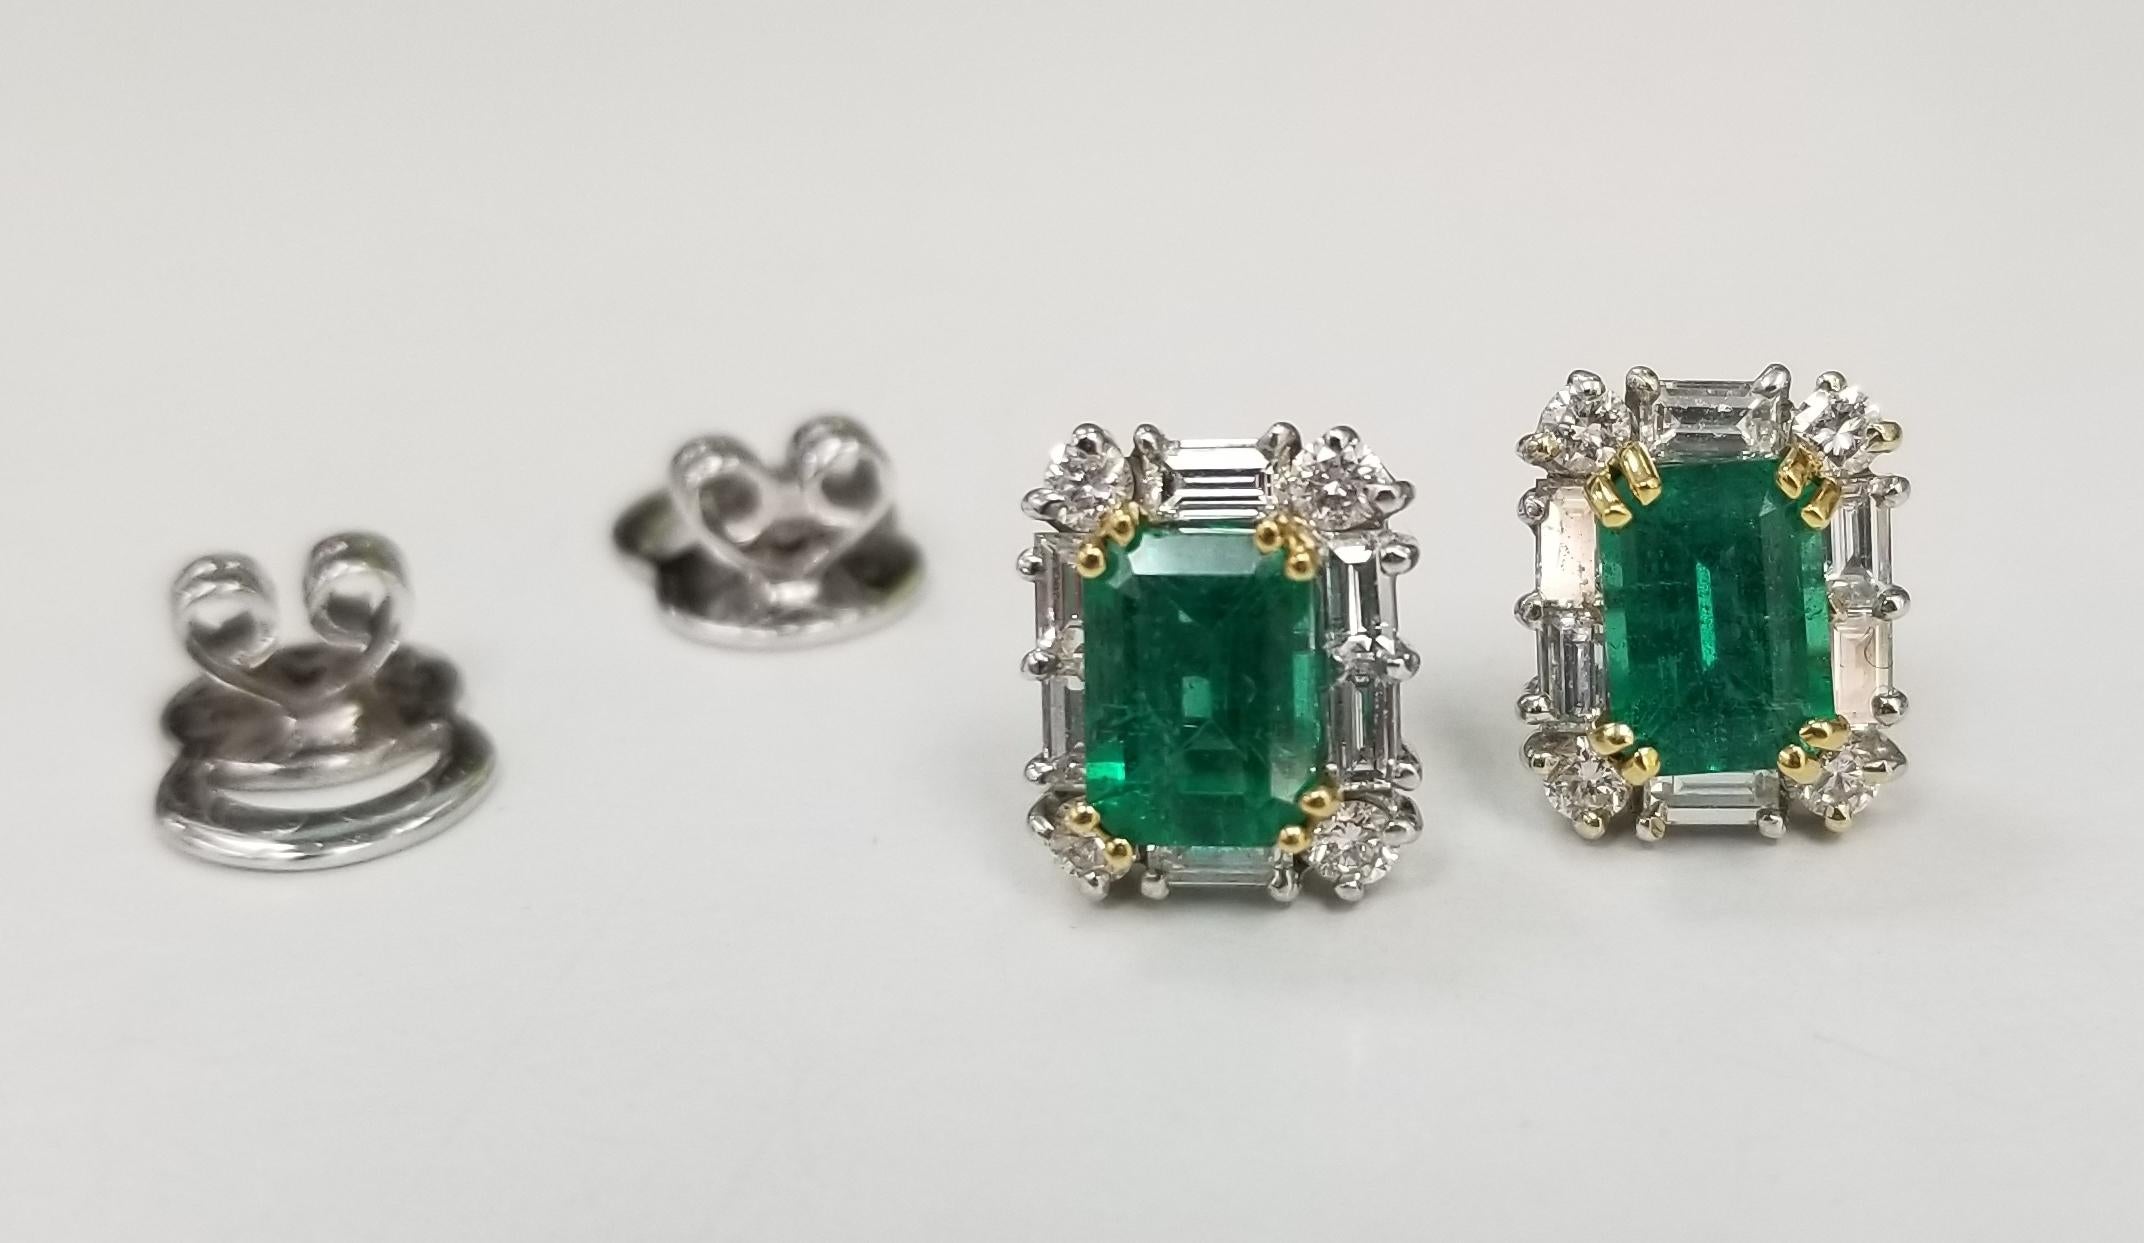 *Motivated to Sell – Please make a Fair Offer*
18K WHITE GOLD COLOMBIAN EMERALD STONE AND ROUND DIAMOND EARRINGS WITH YELLOW GOLD PRONGS.
Specifications:
    MAIN stone:  2 COLOMBIAN EMERALD 7.15 x 5.15MM 
    WEIGHT: 2.03CTW
    DIAMOND: 12